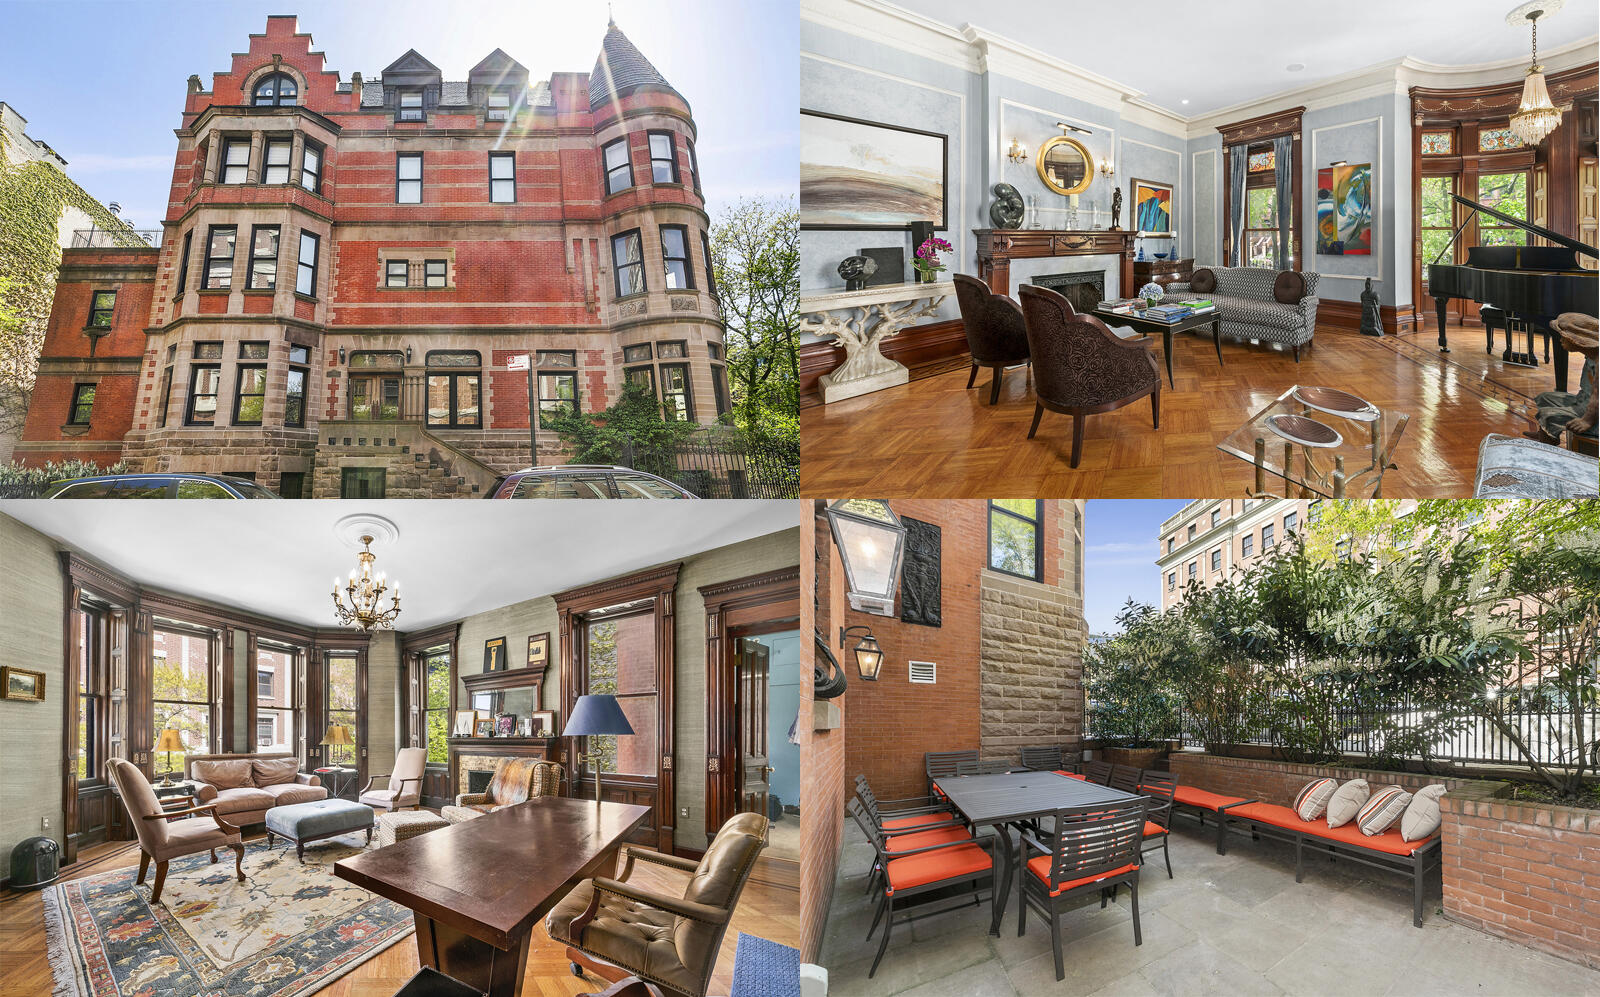 The home that Wes Anderson rented to film "The Royal Tenenbaums" is available to rent. (Compass)